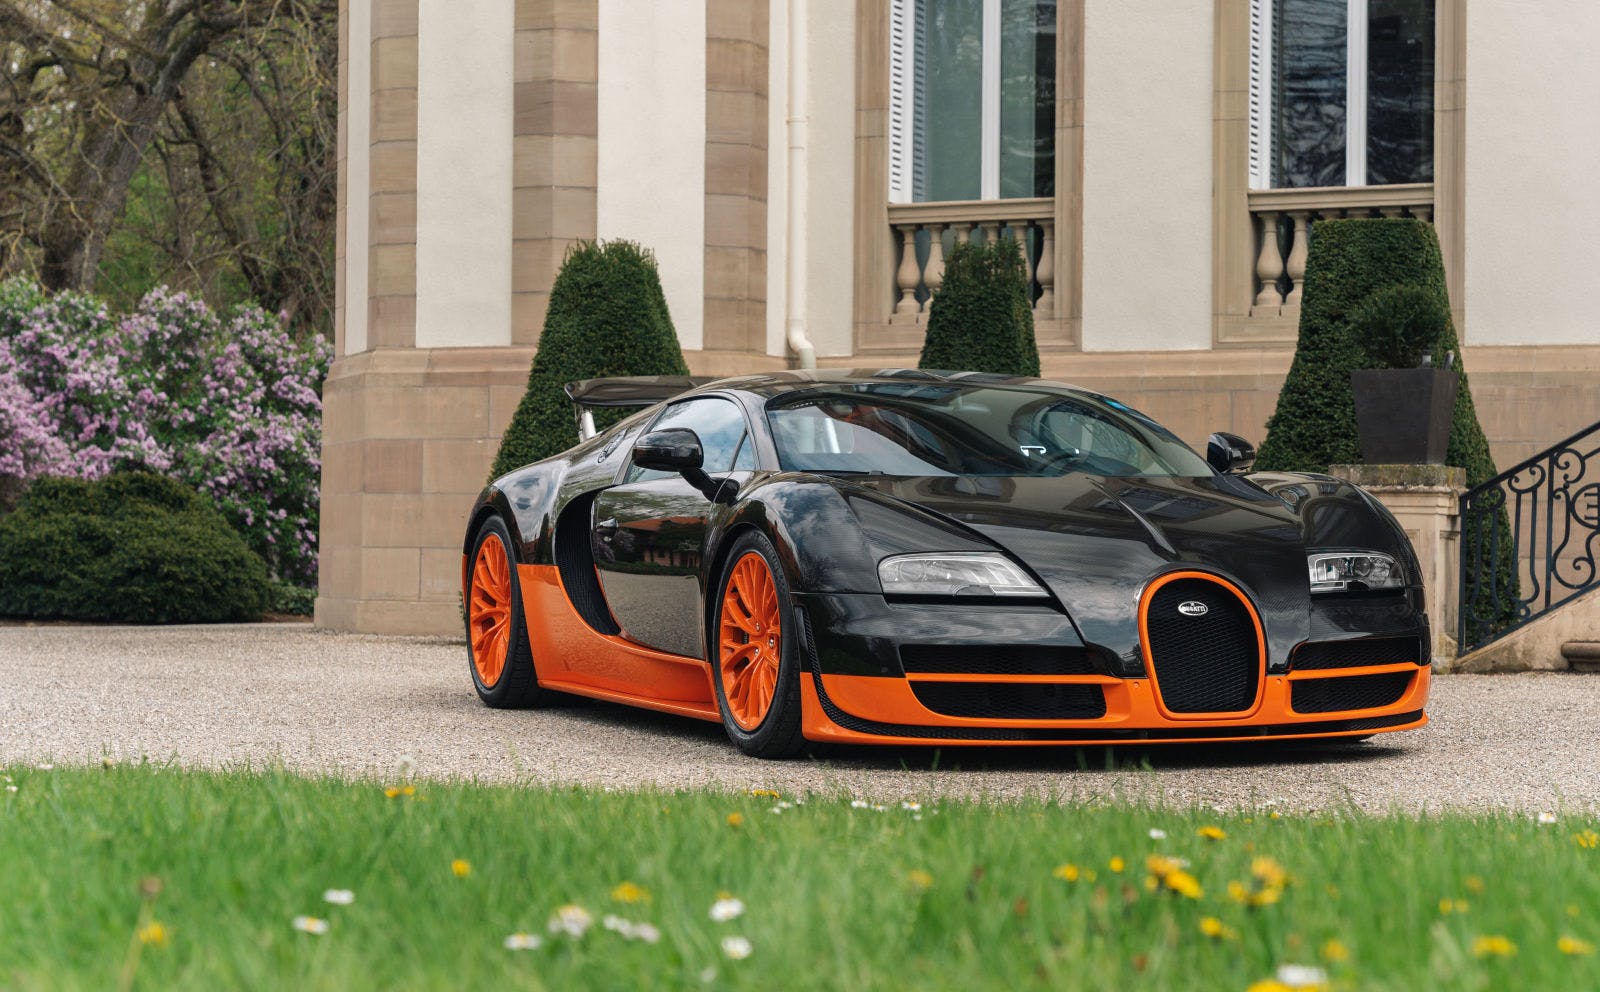 The Bugatti Veyron 16.4 Super Sport, realized a world record speed in 2010 having recorded 431.07 km/h.
